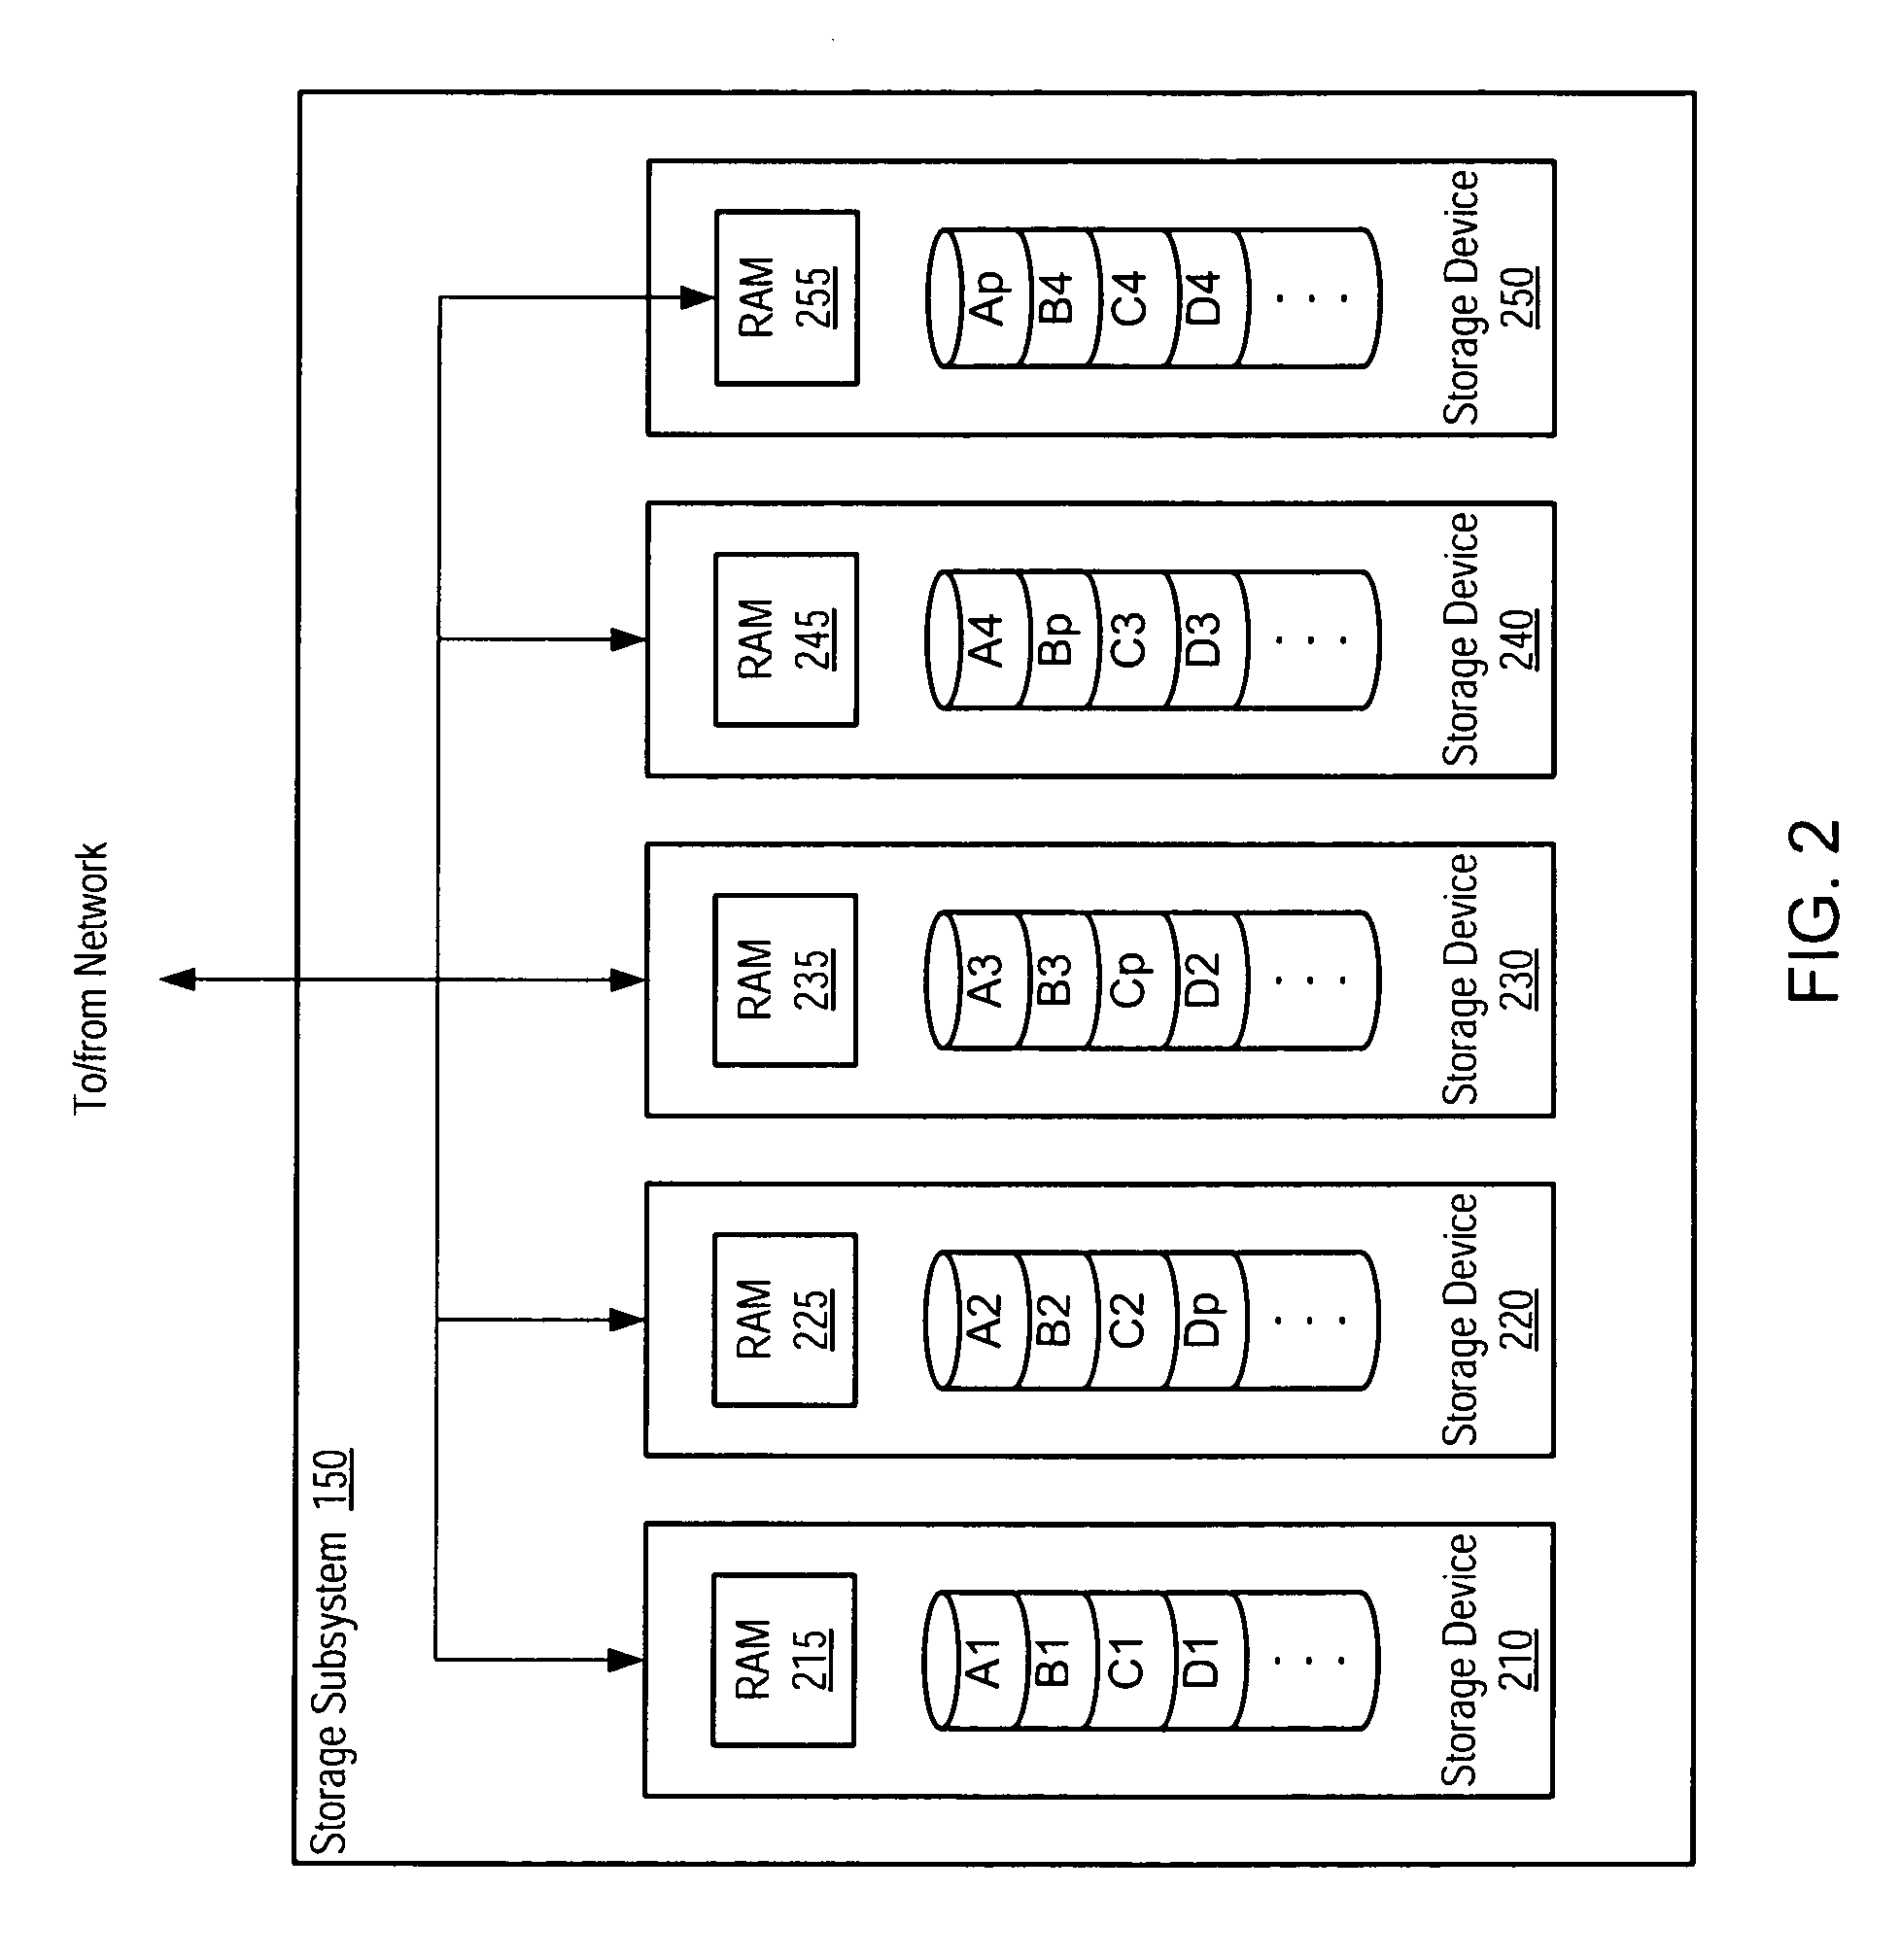 Failure handling using overlay objects on a file system using object based storage devices